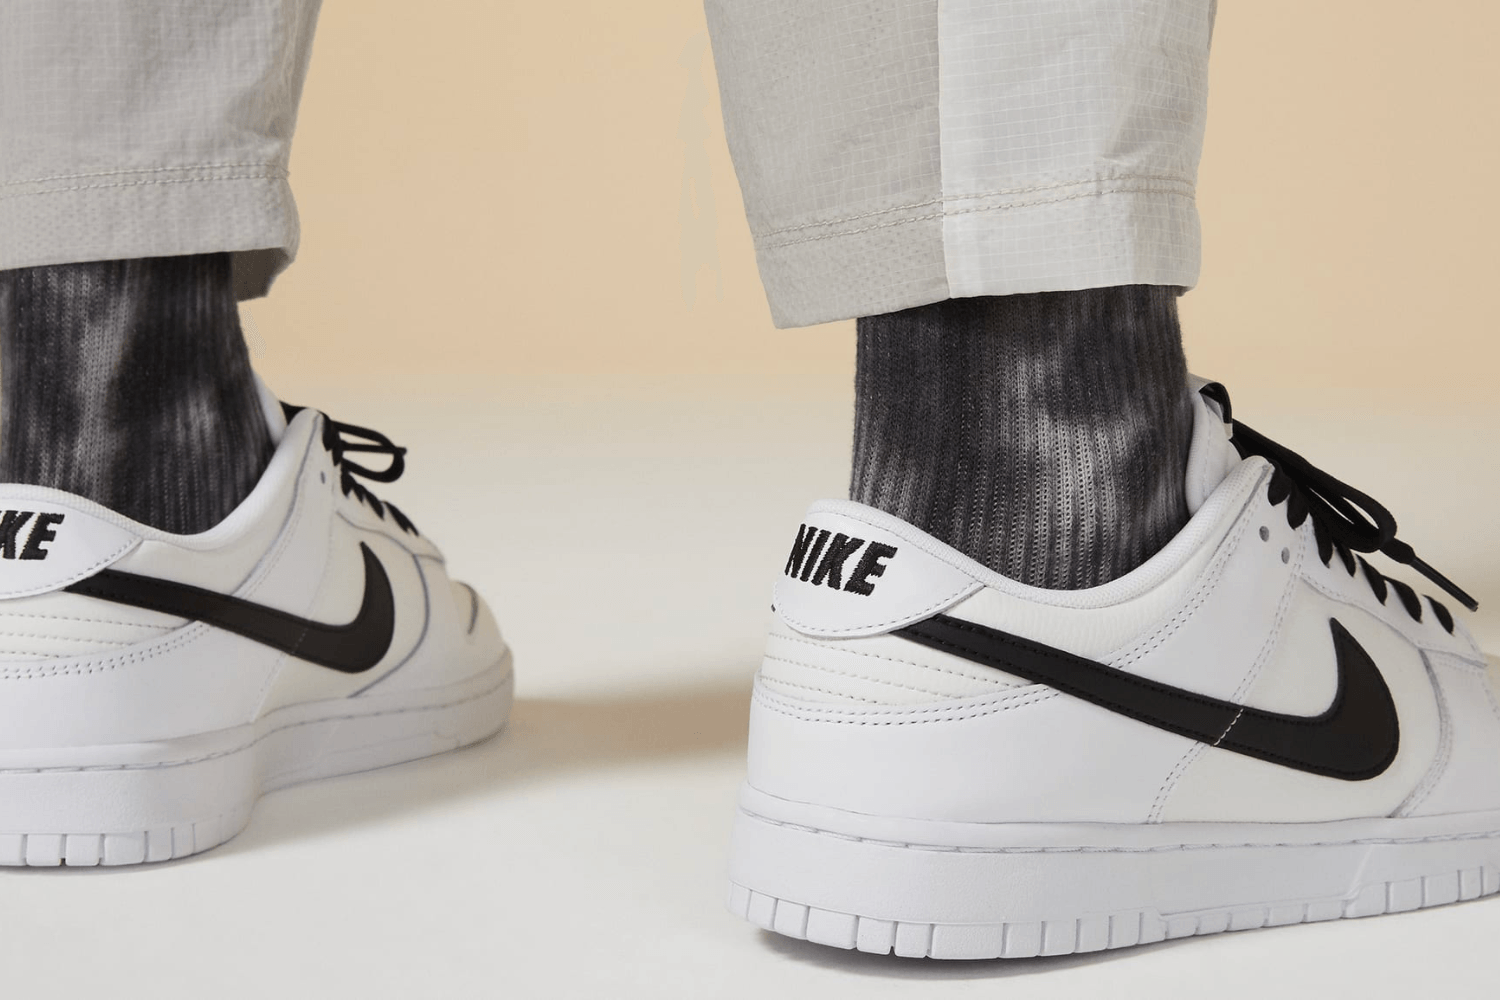 The best white sneakers at Nike right now